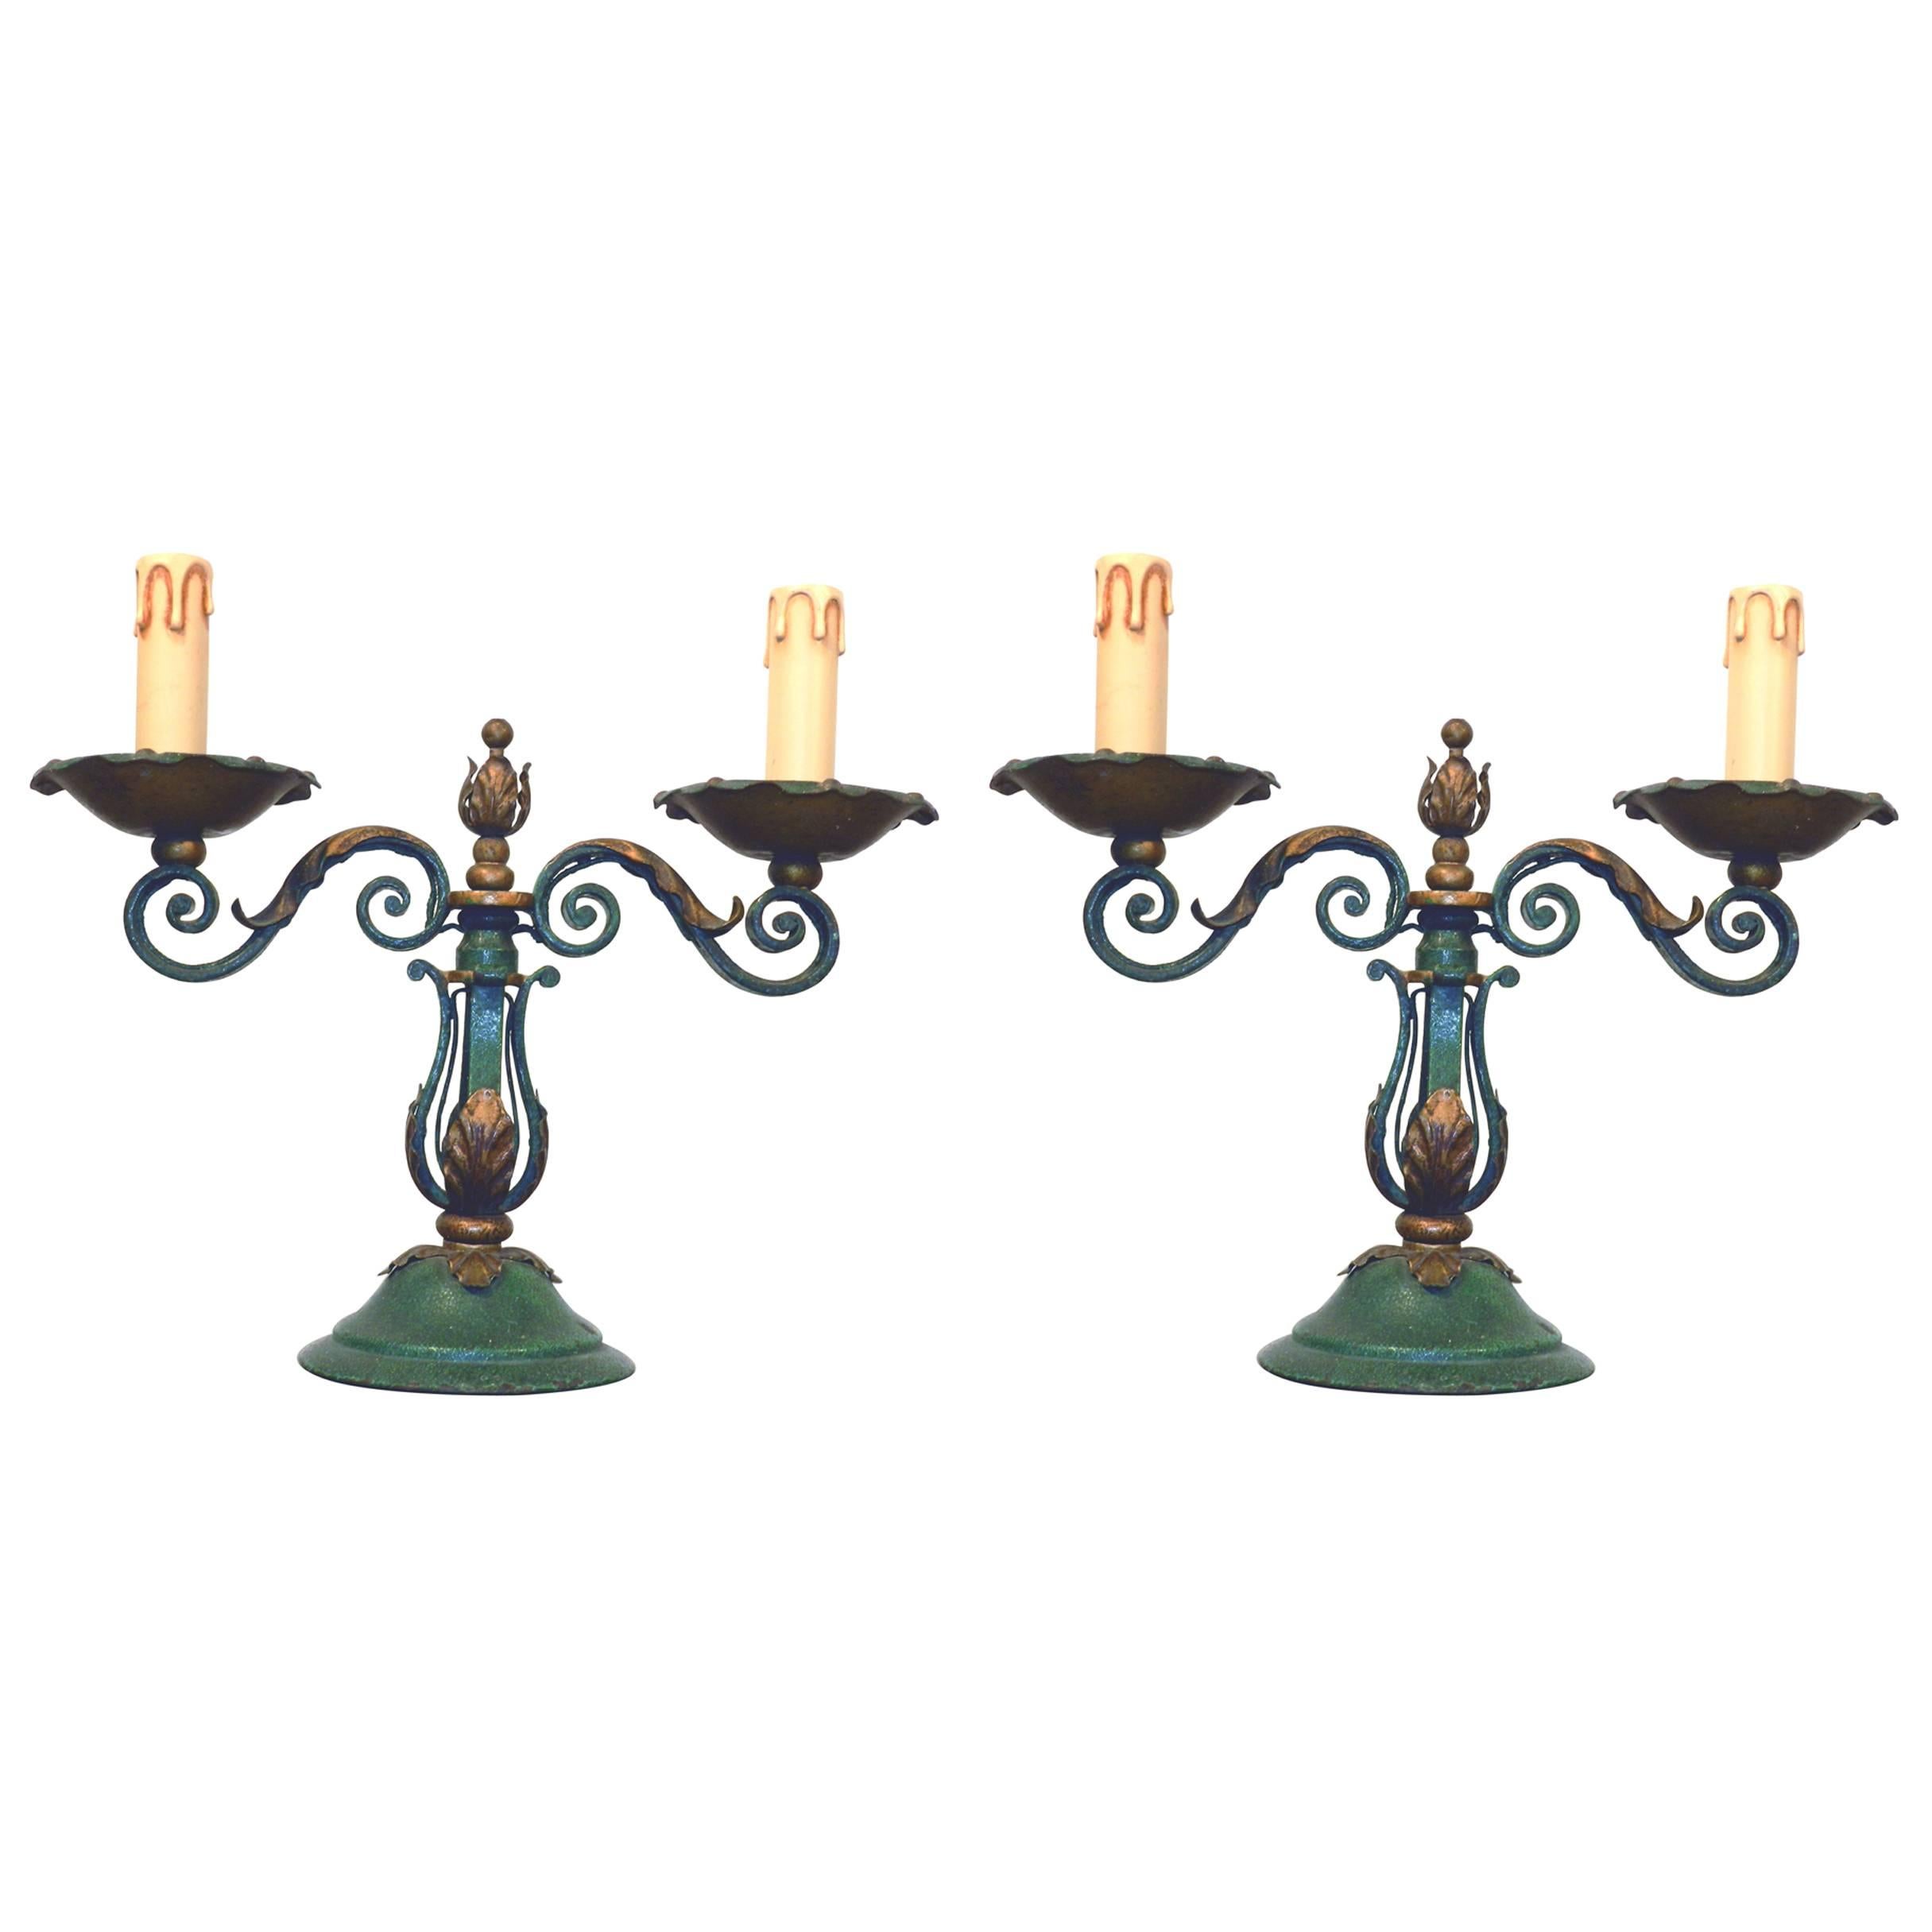 Pair of Art Deco Wrought Iron Table Lamps, circa 1940